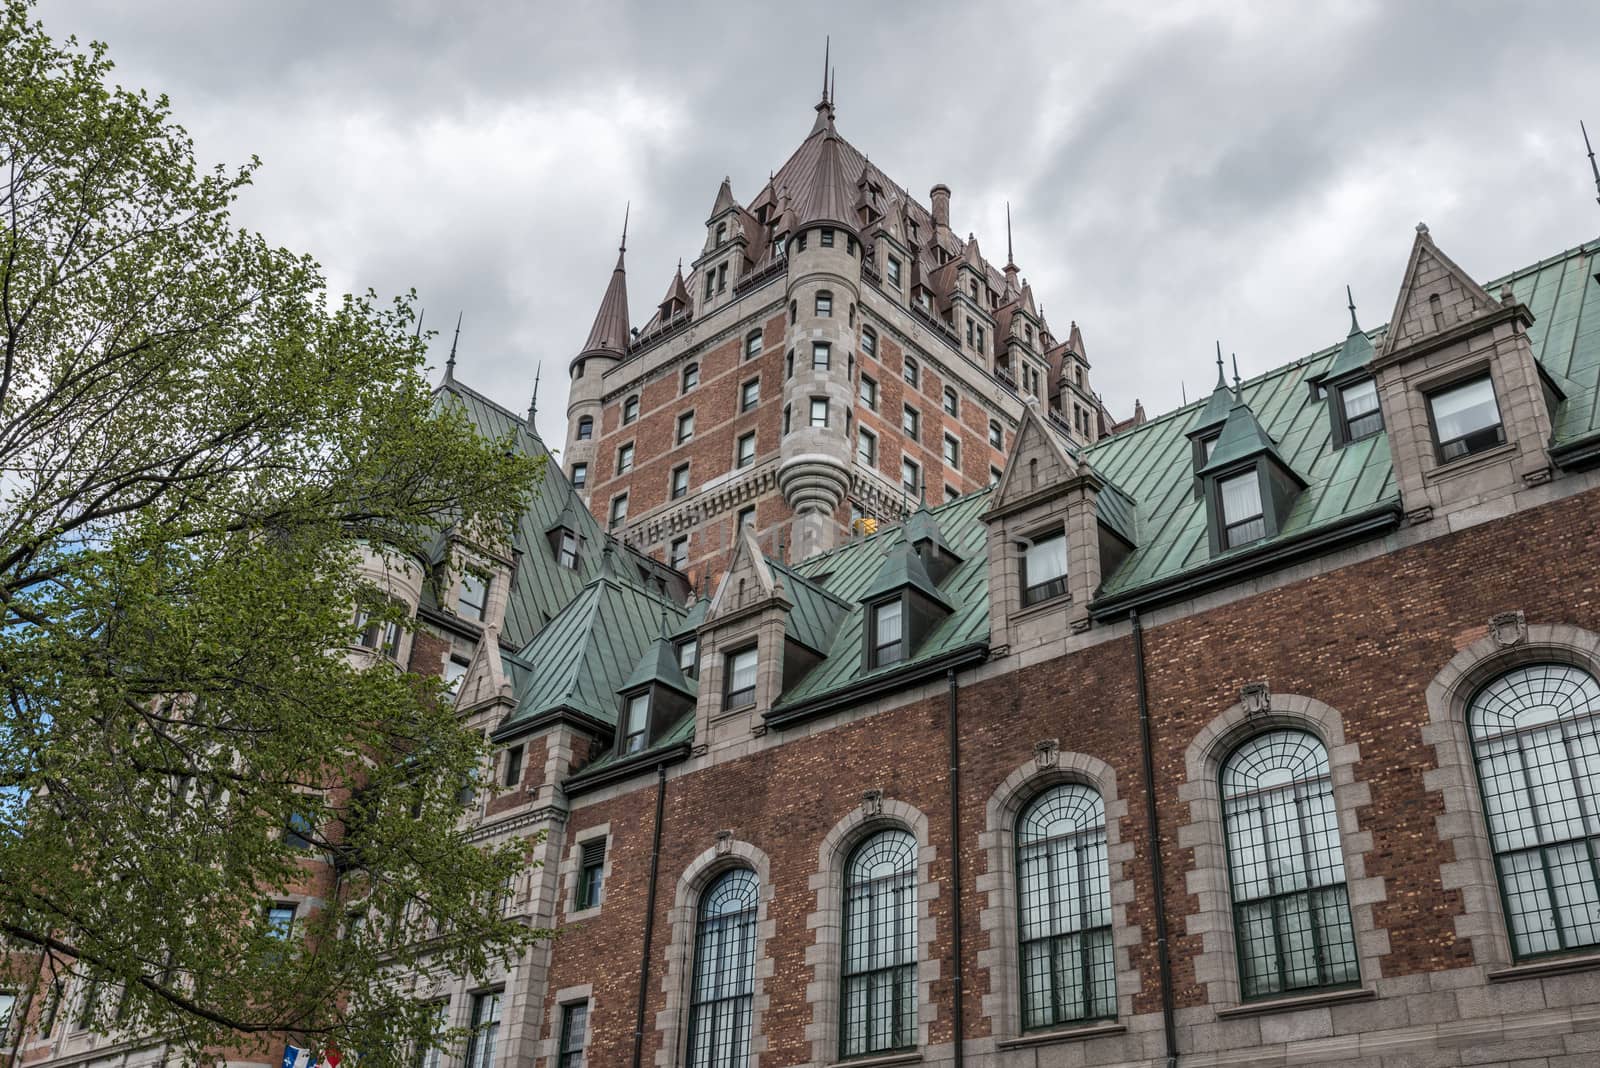 Quebec city, Quebec Province, Canada - May 27, 2013: Frontenac castle grand hotel of Quebec City, July 12, 2013.